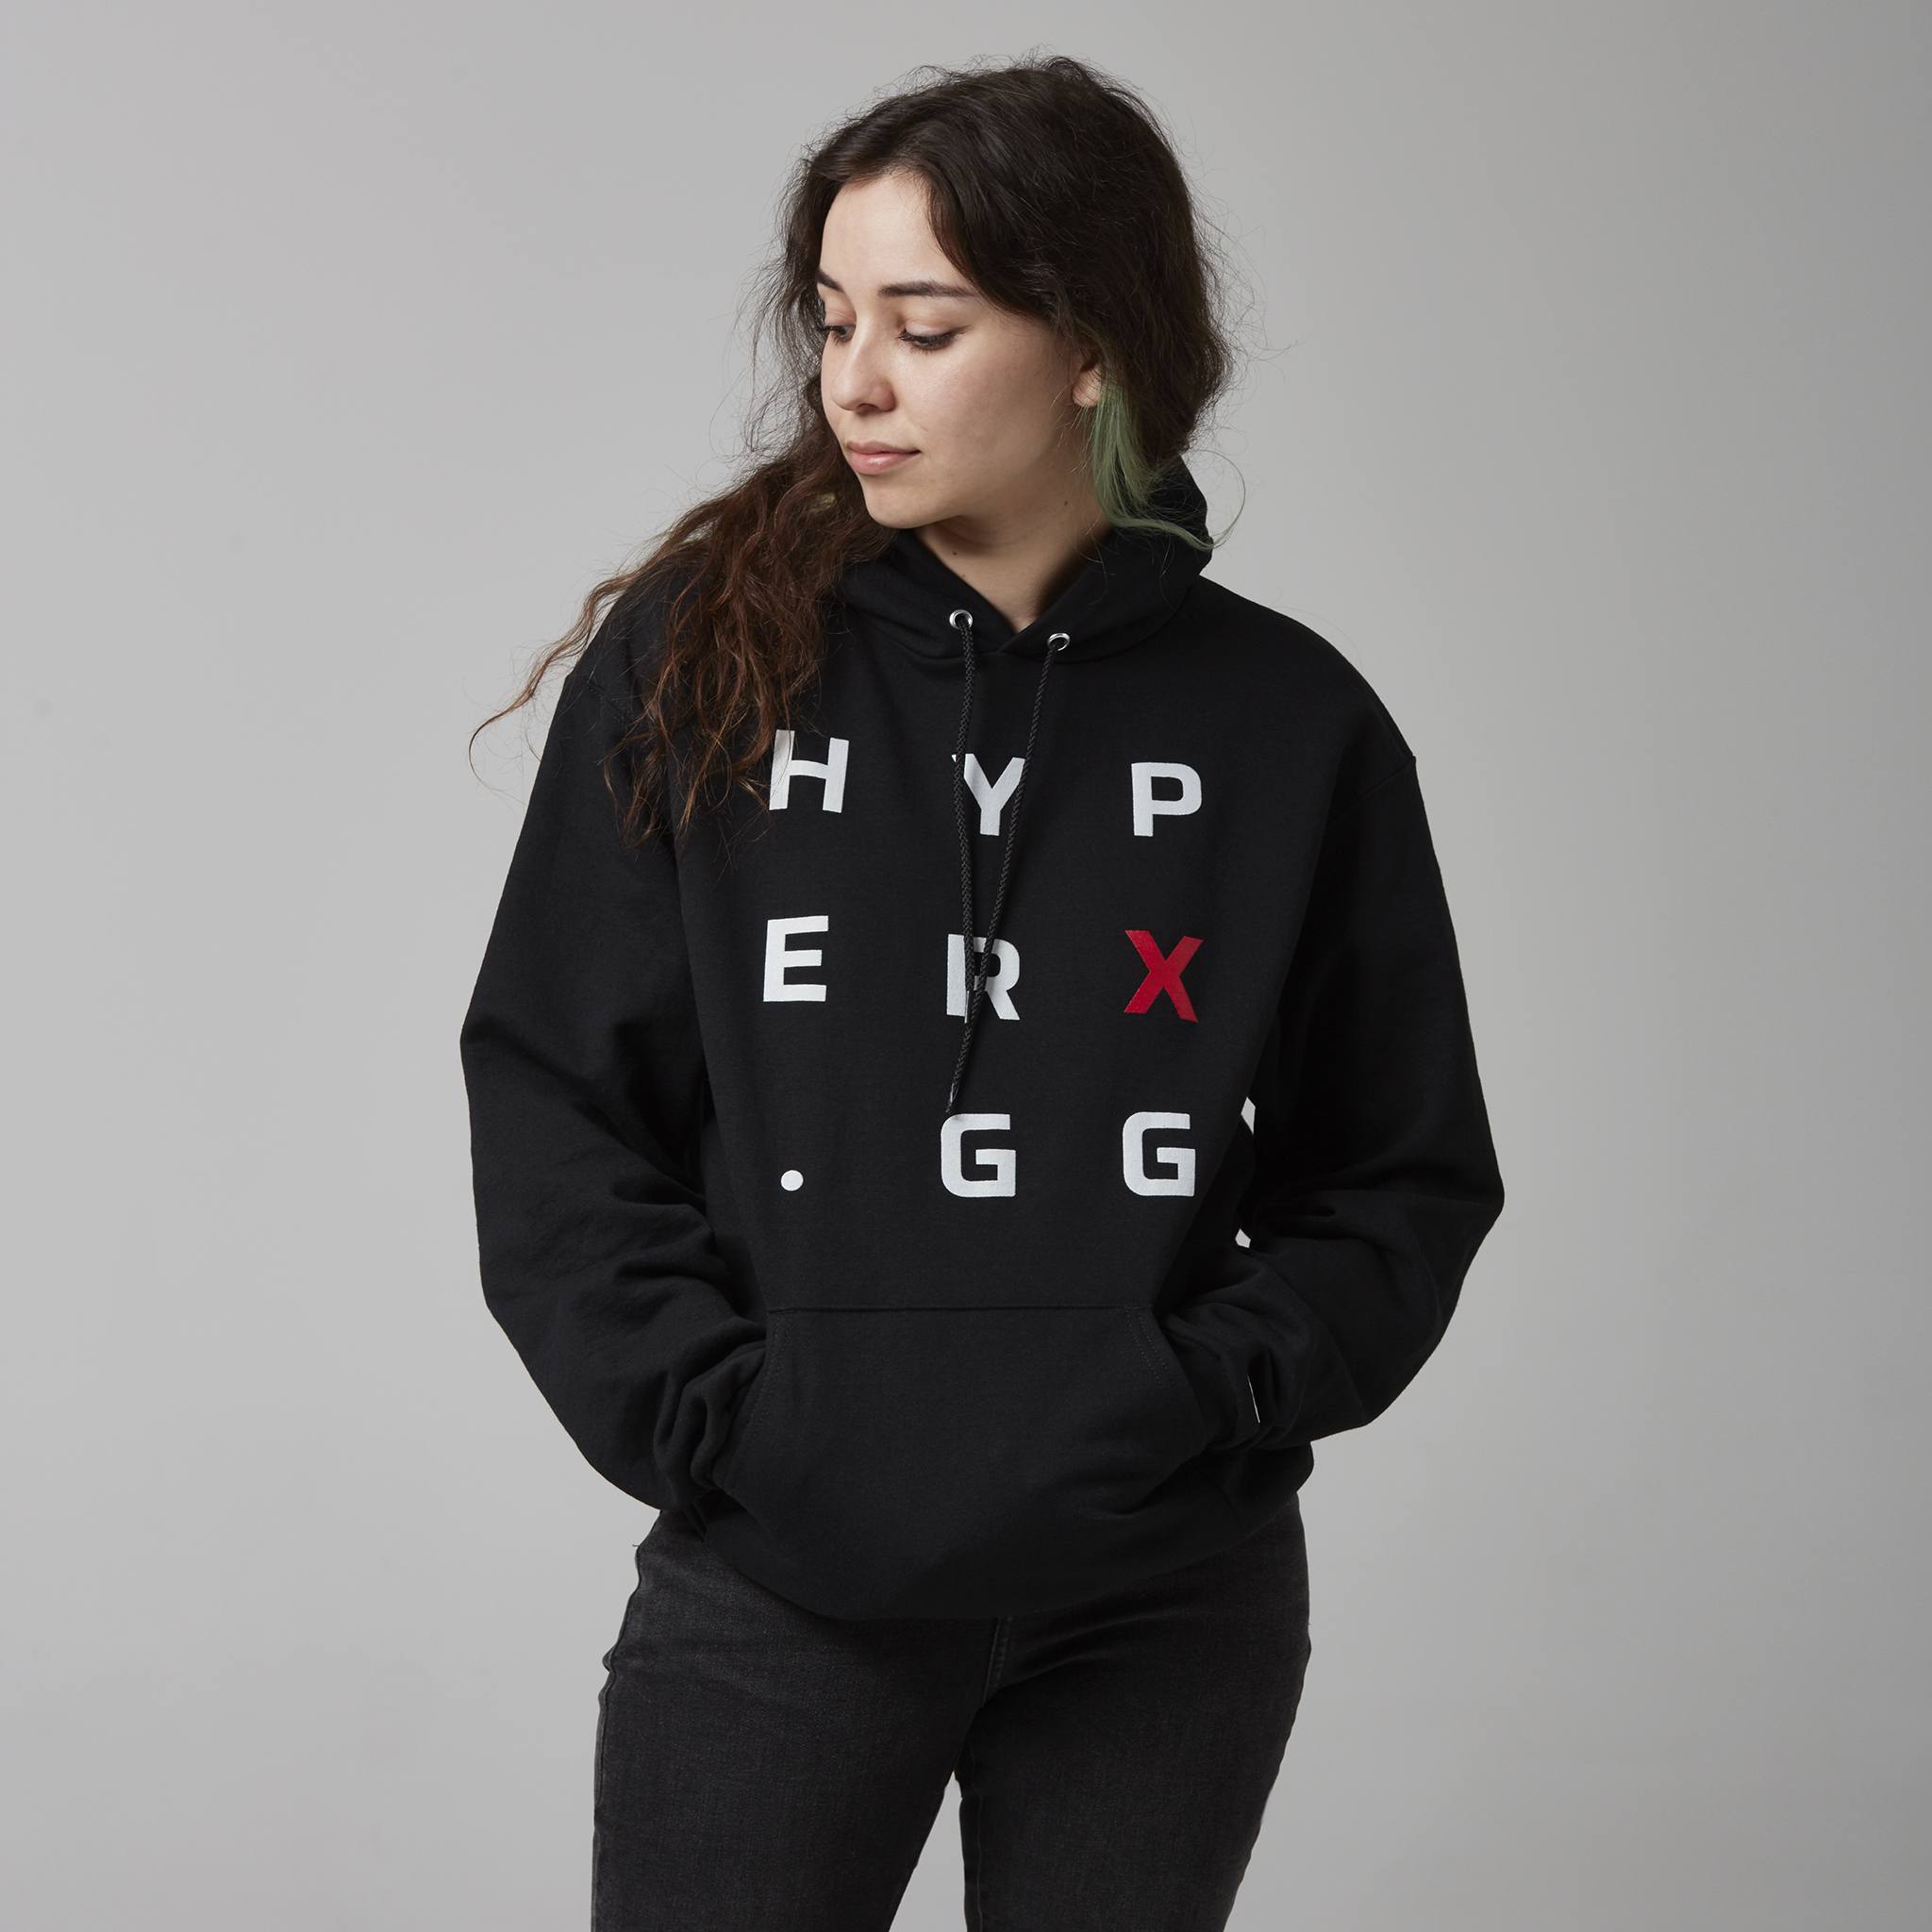 HyperX x Champion Launches New GG Apparel Collection | The Urban Daily